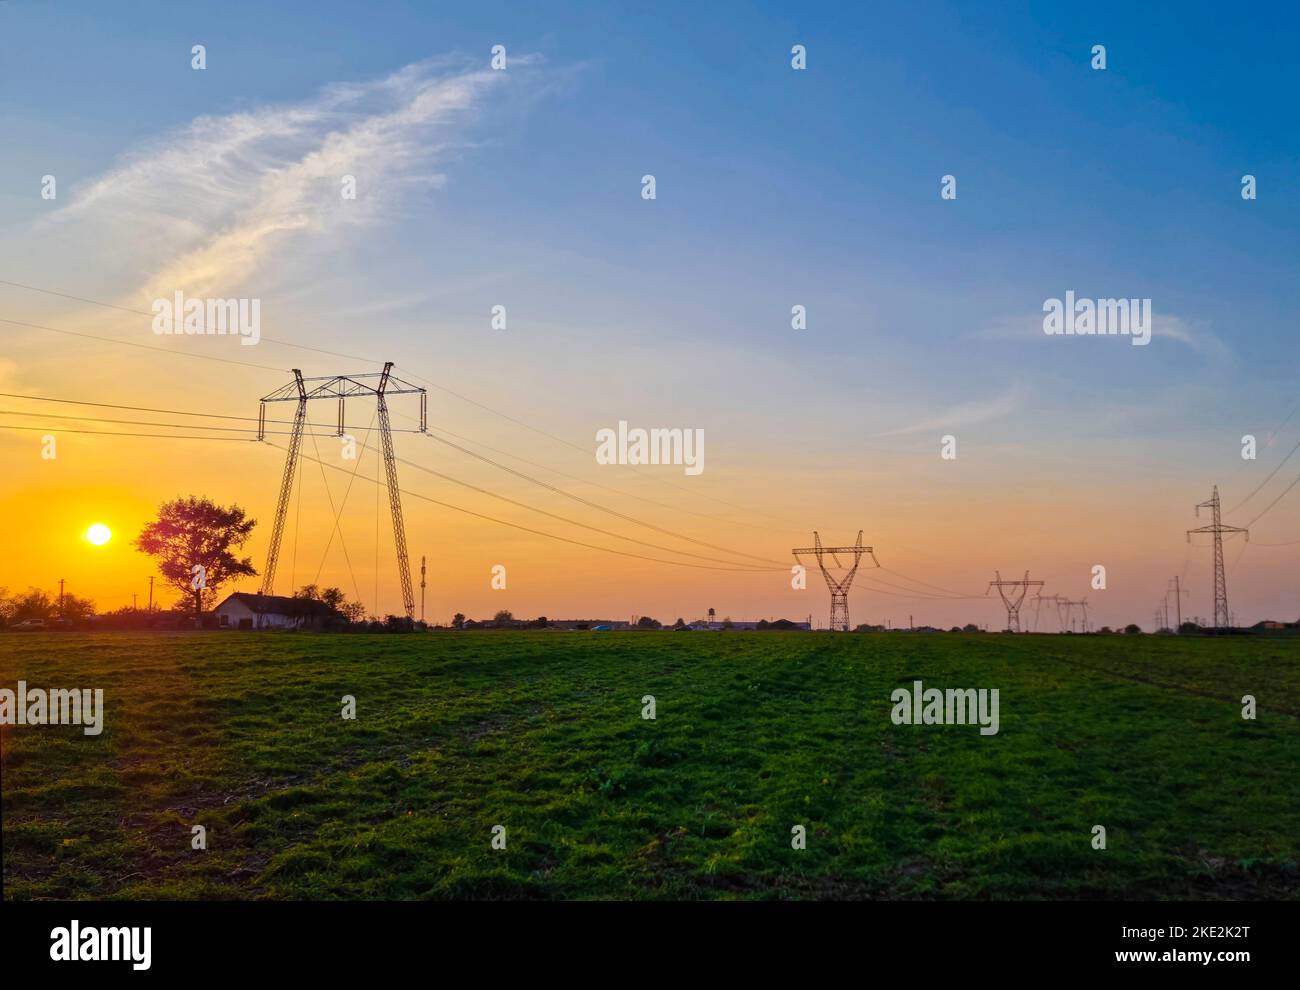 High voltage electric poles, rural landscape with power pylons in a row, at sunset Stock Photo